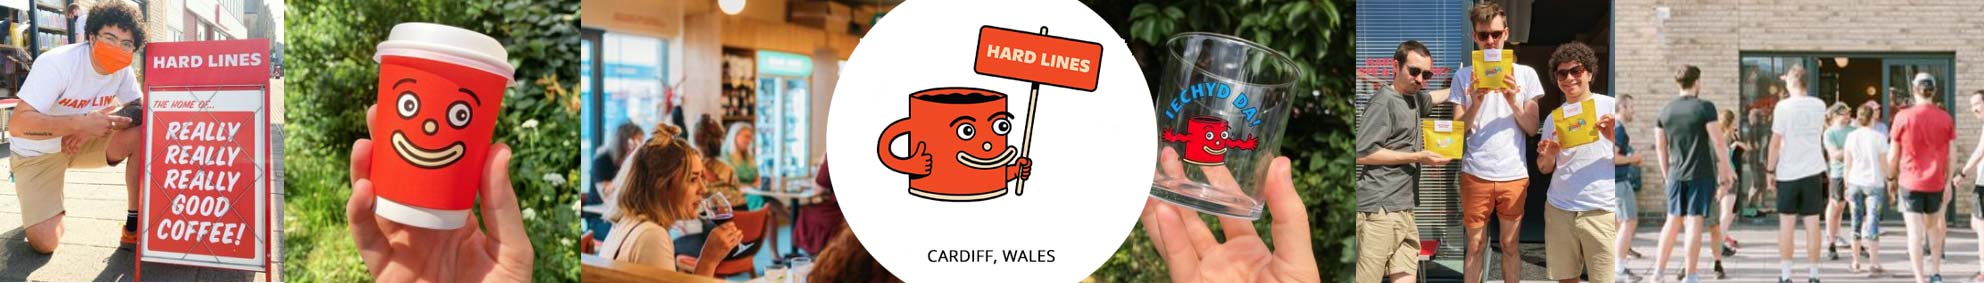 Hard Lines Coffee Cardiff on UK Best Coffee Subscription Service